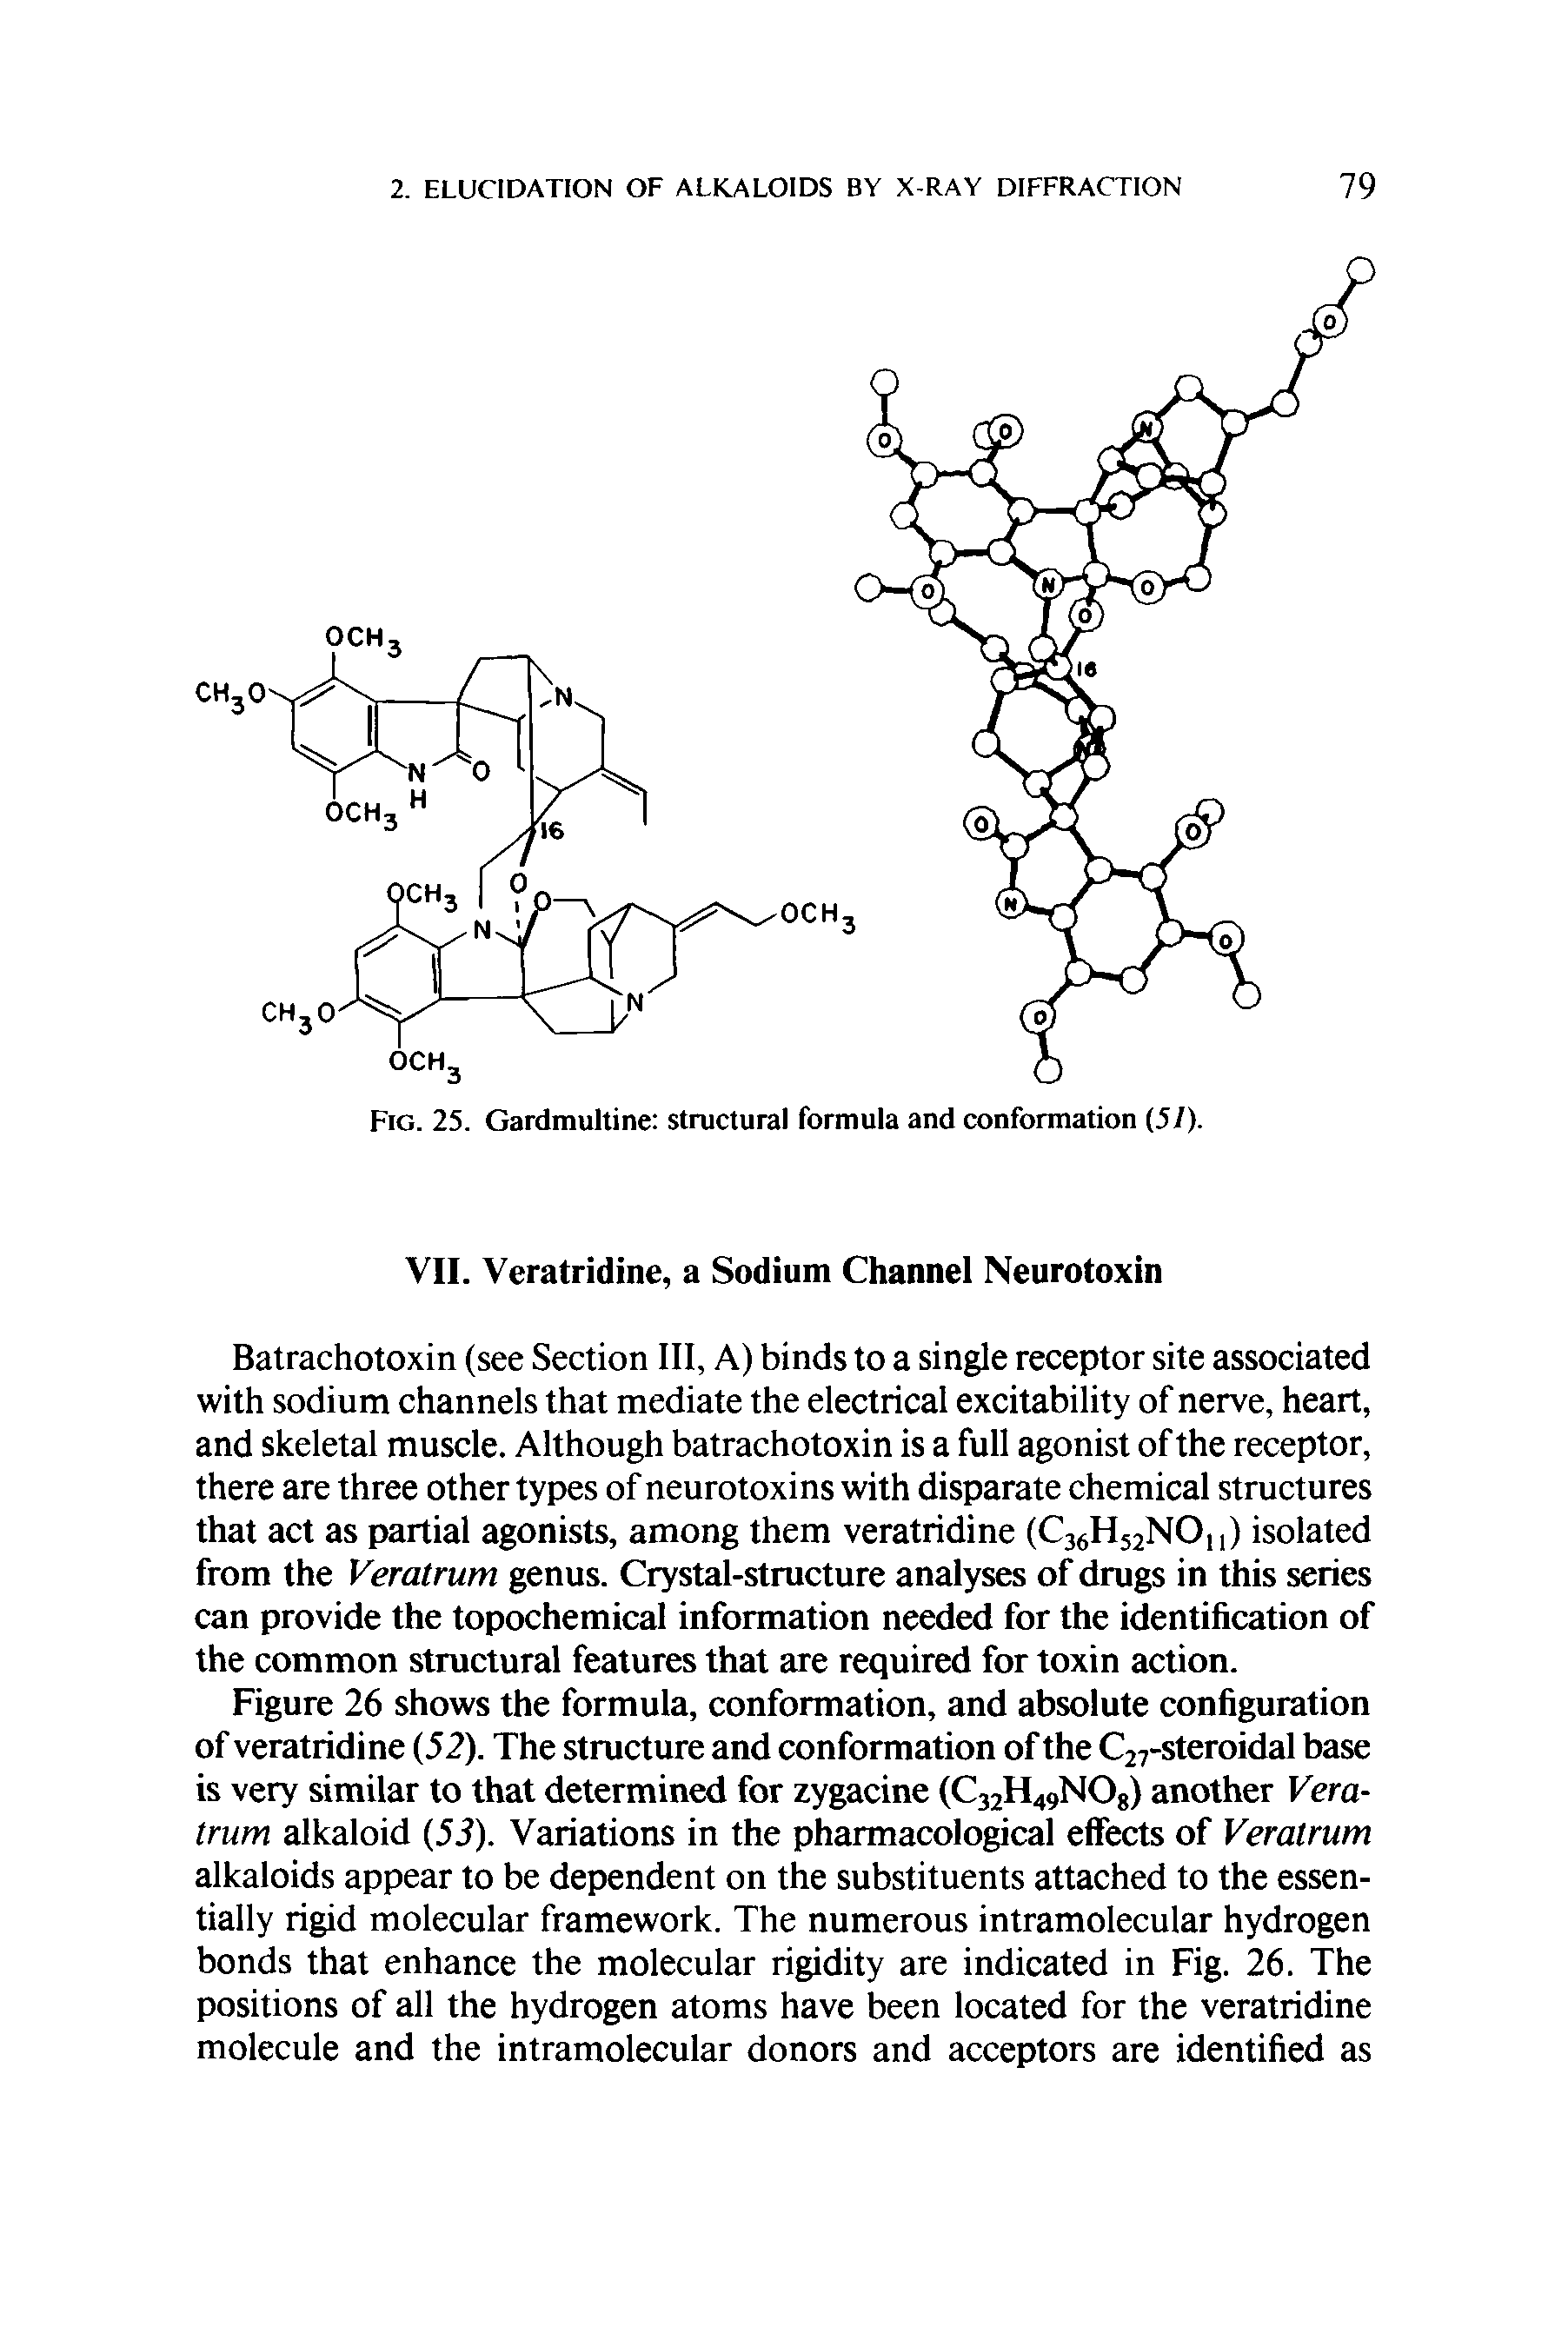 Figure 26 shows the formula, conformation, and absolute configuration of veratridine (52). The structure and conformation of the C27-steroidal base is very similar to that determined for zygacine (C32H49N08) another Veratrum alkaloid (53). Variations in the pharmacological effects of Veratrum alkaloids appear to be dependent on the substituents attached to the essentially rigid molecular framework. The numerous intramolecular hydrogen bonds that enhance the molecular rigidity are indicated in Fig. 26. The positions of all the hydrogen atoms have been located for the veratridine molecule and the intramolecular donors and acceptors are identified as...